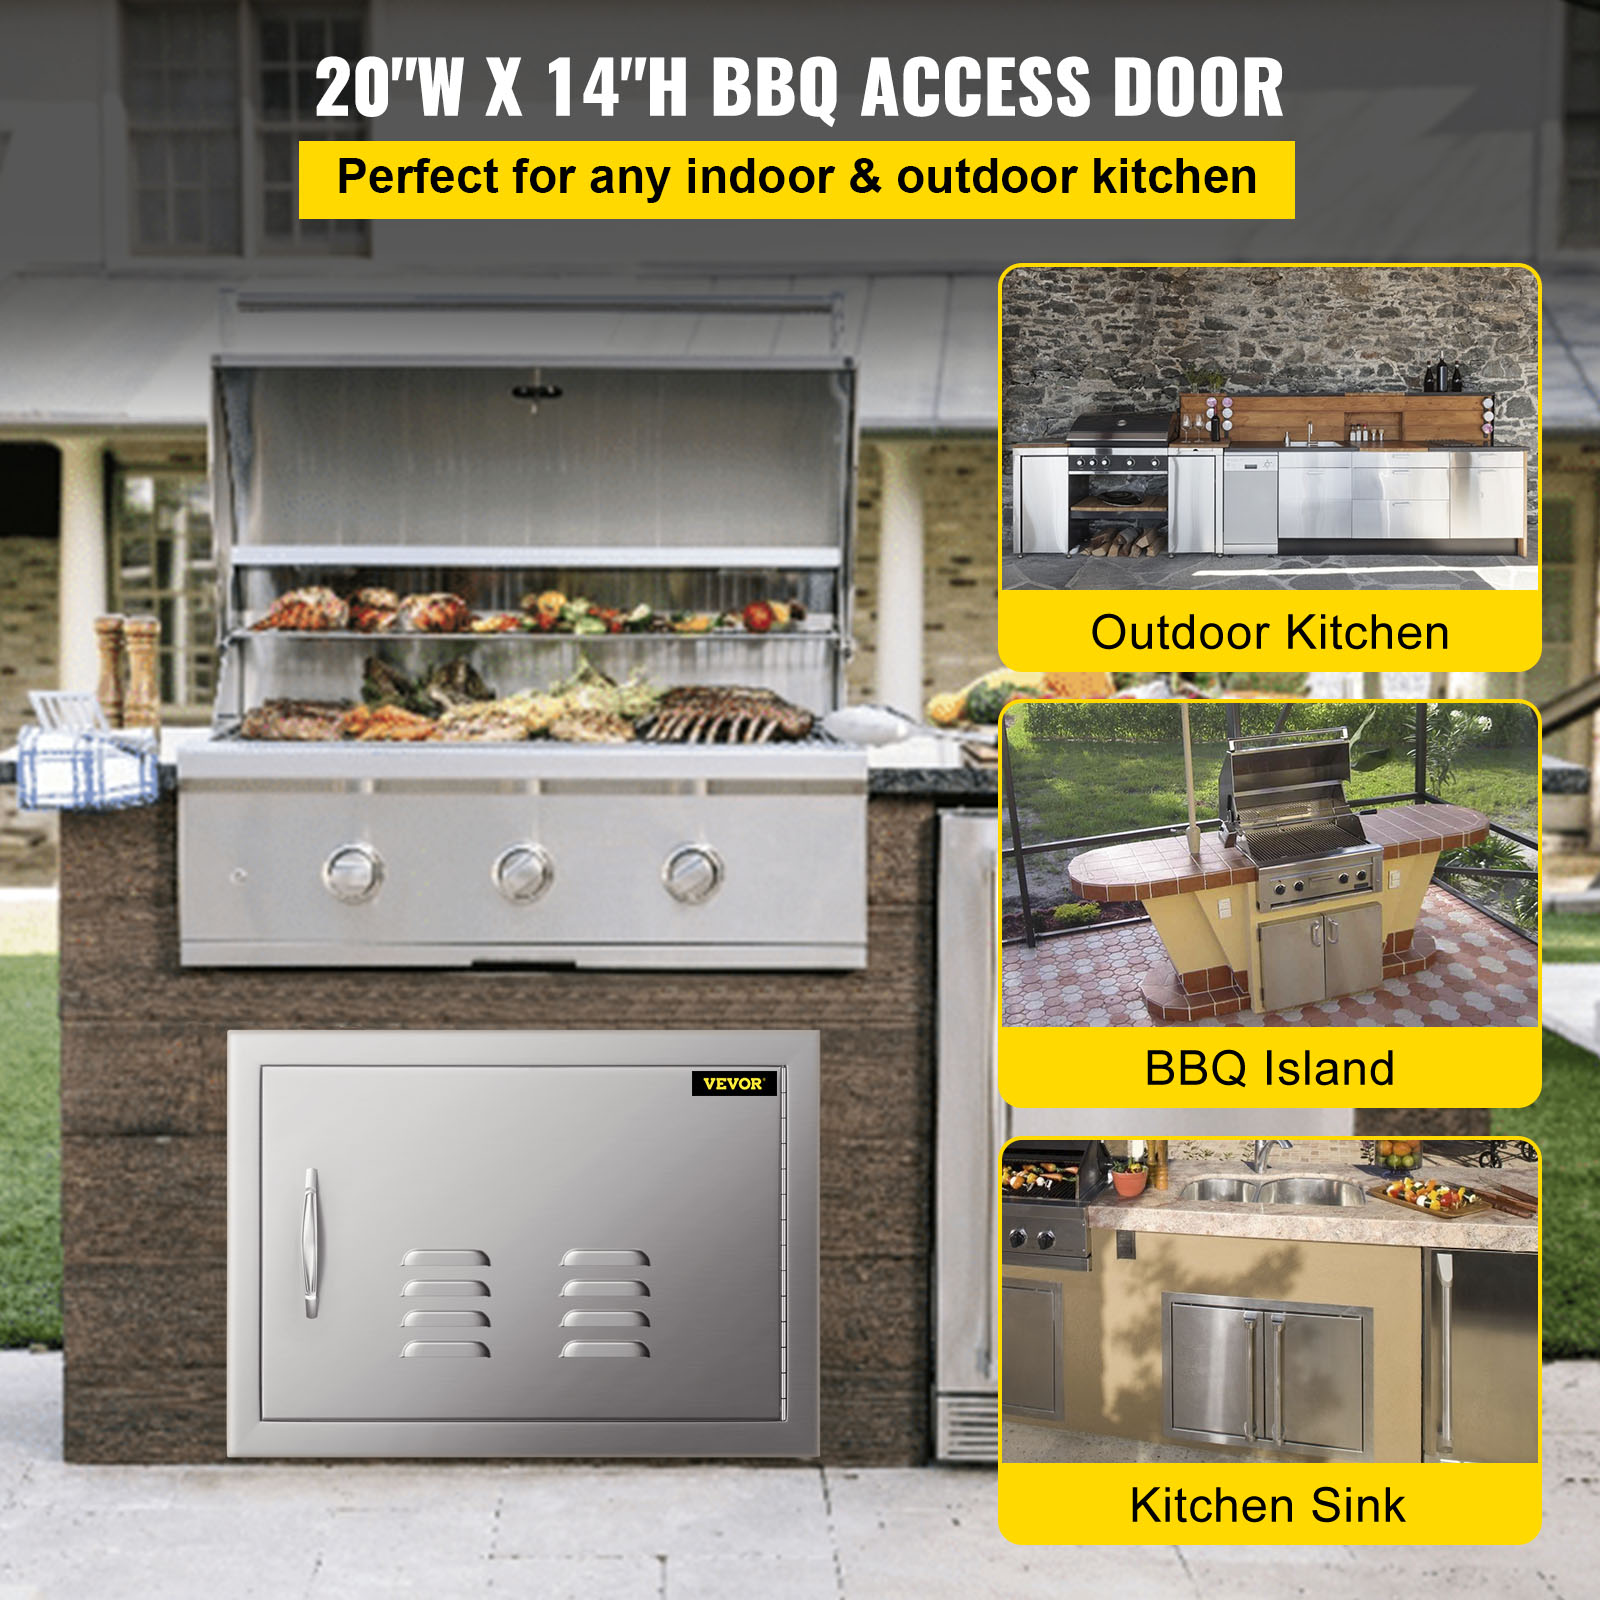 VEVOR  BBQ Access  Door with Vents 14W x 20H inch Wall Construction Stainless Steel Flush Mount for BBQ Island, 14inch x 20inch, Single BBQ Island Door Metals Horizontal Single Access Door - image 3 of 10